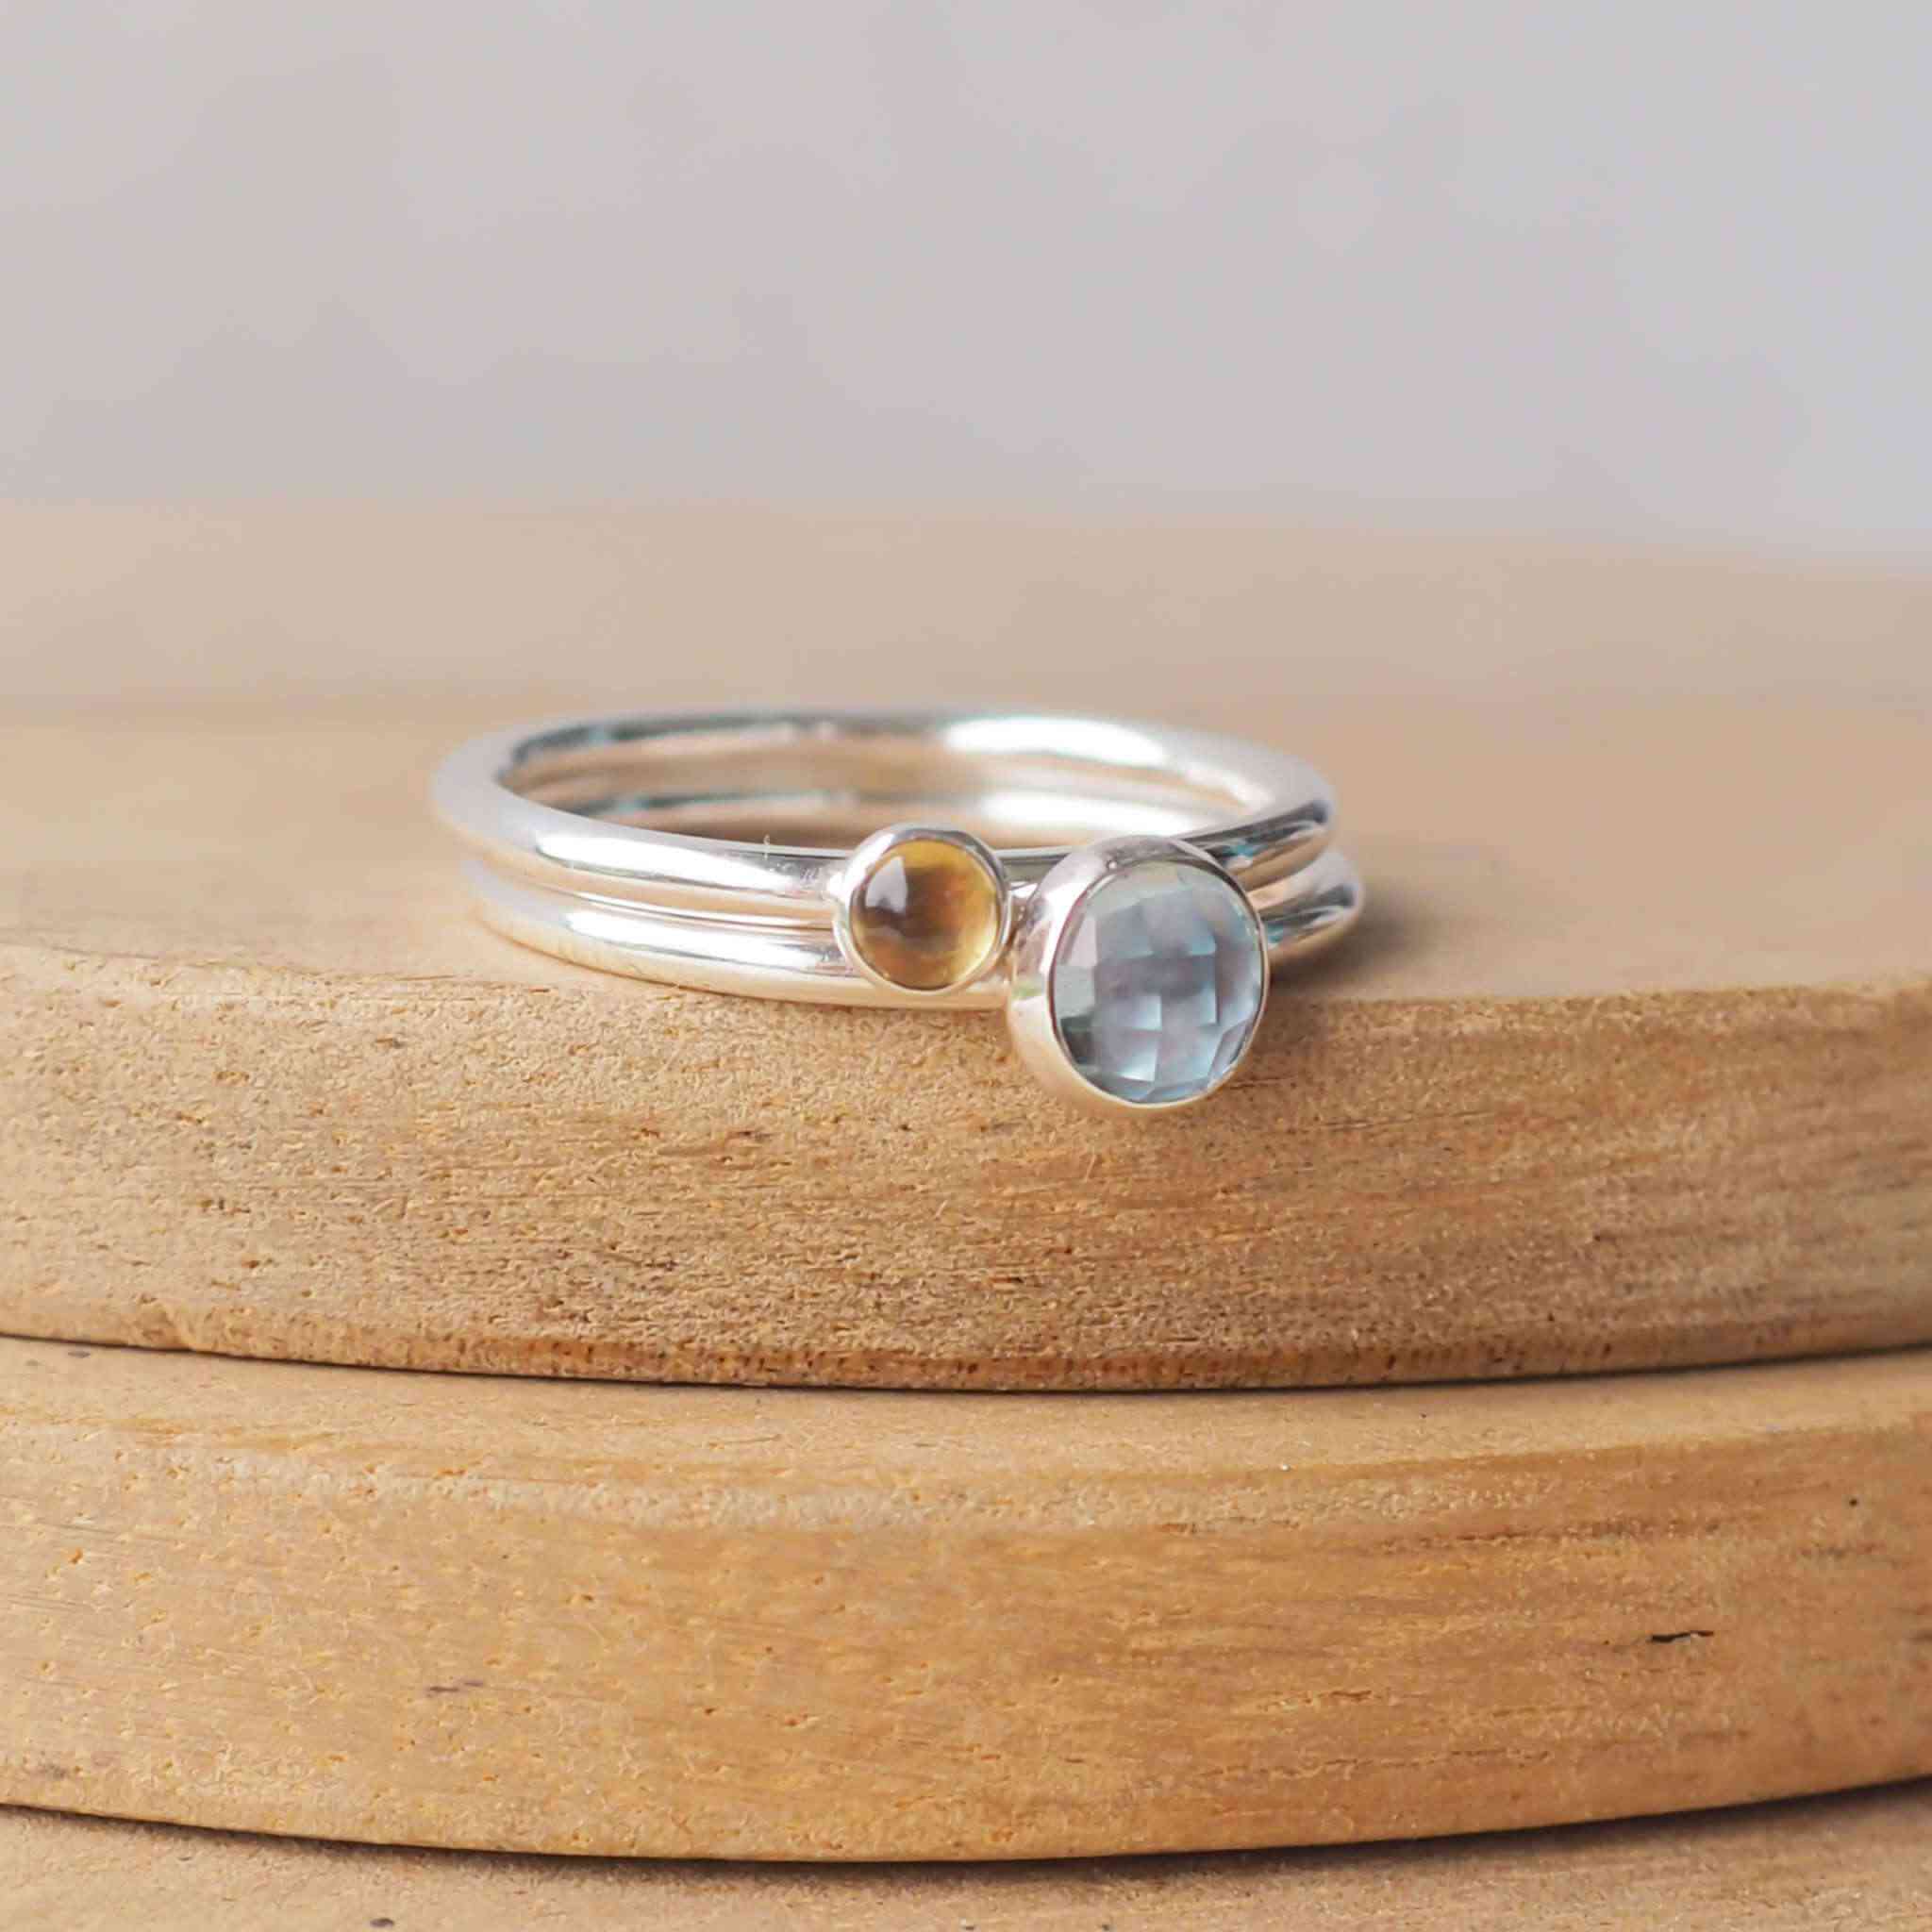 Two Birthstone Ring set with Blue Topaz and Citrine to mark March and November Birthdays. The two rings are made with Sterling Silver and a 5mm blue round cabochon, with a further ring with 3mm round gem in a yellow Citrine . Handmade in Scotland by maram jewellery